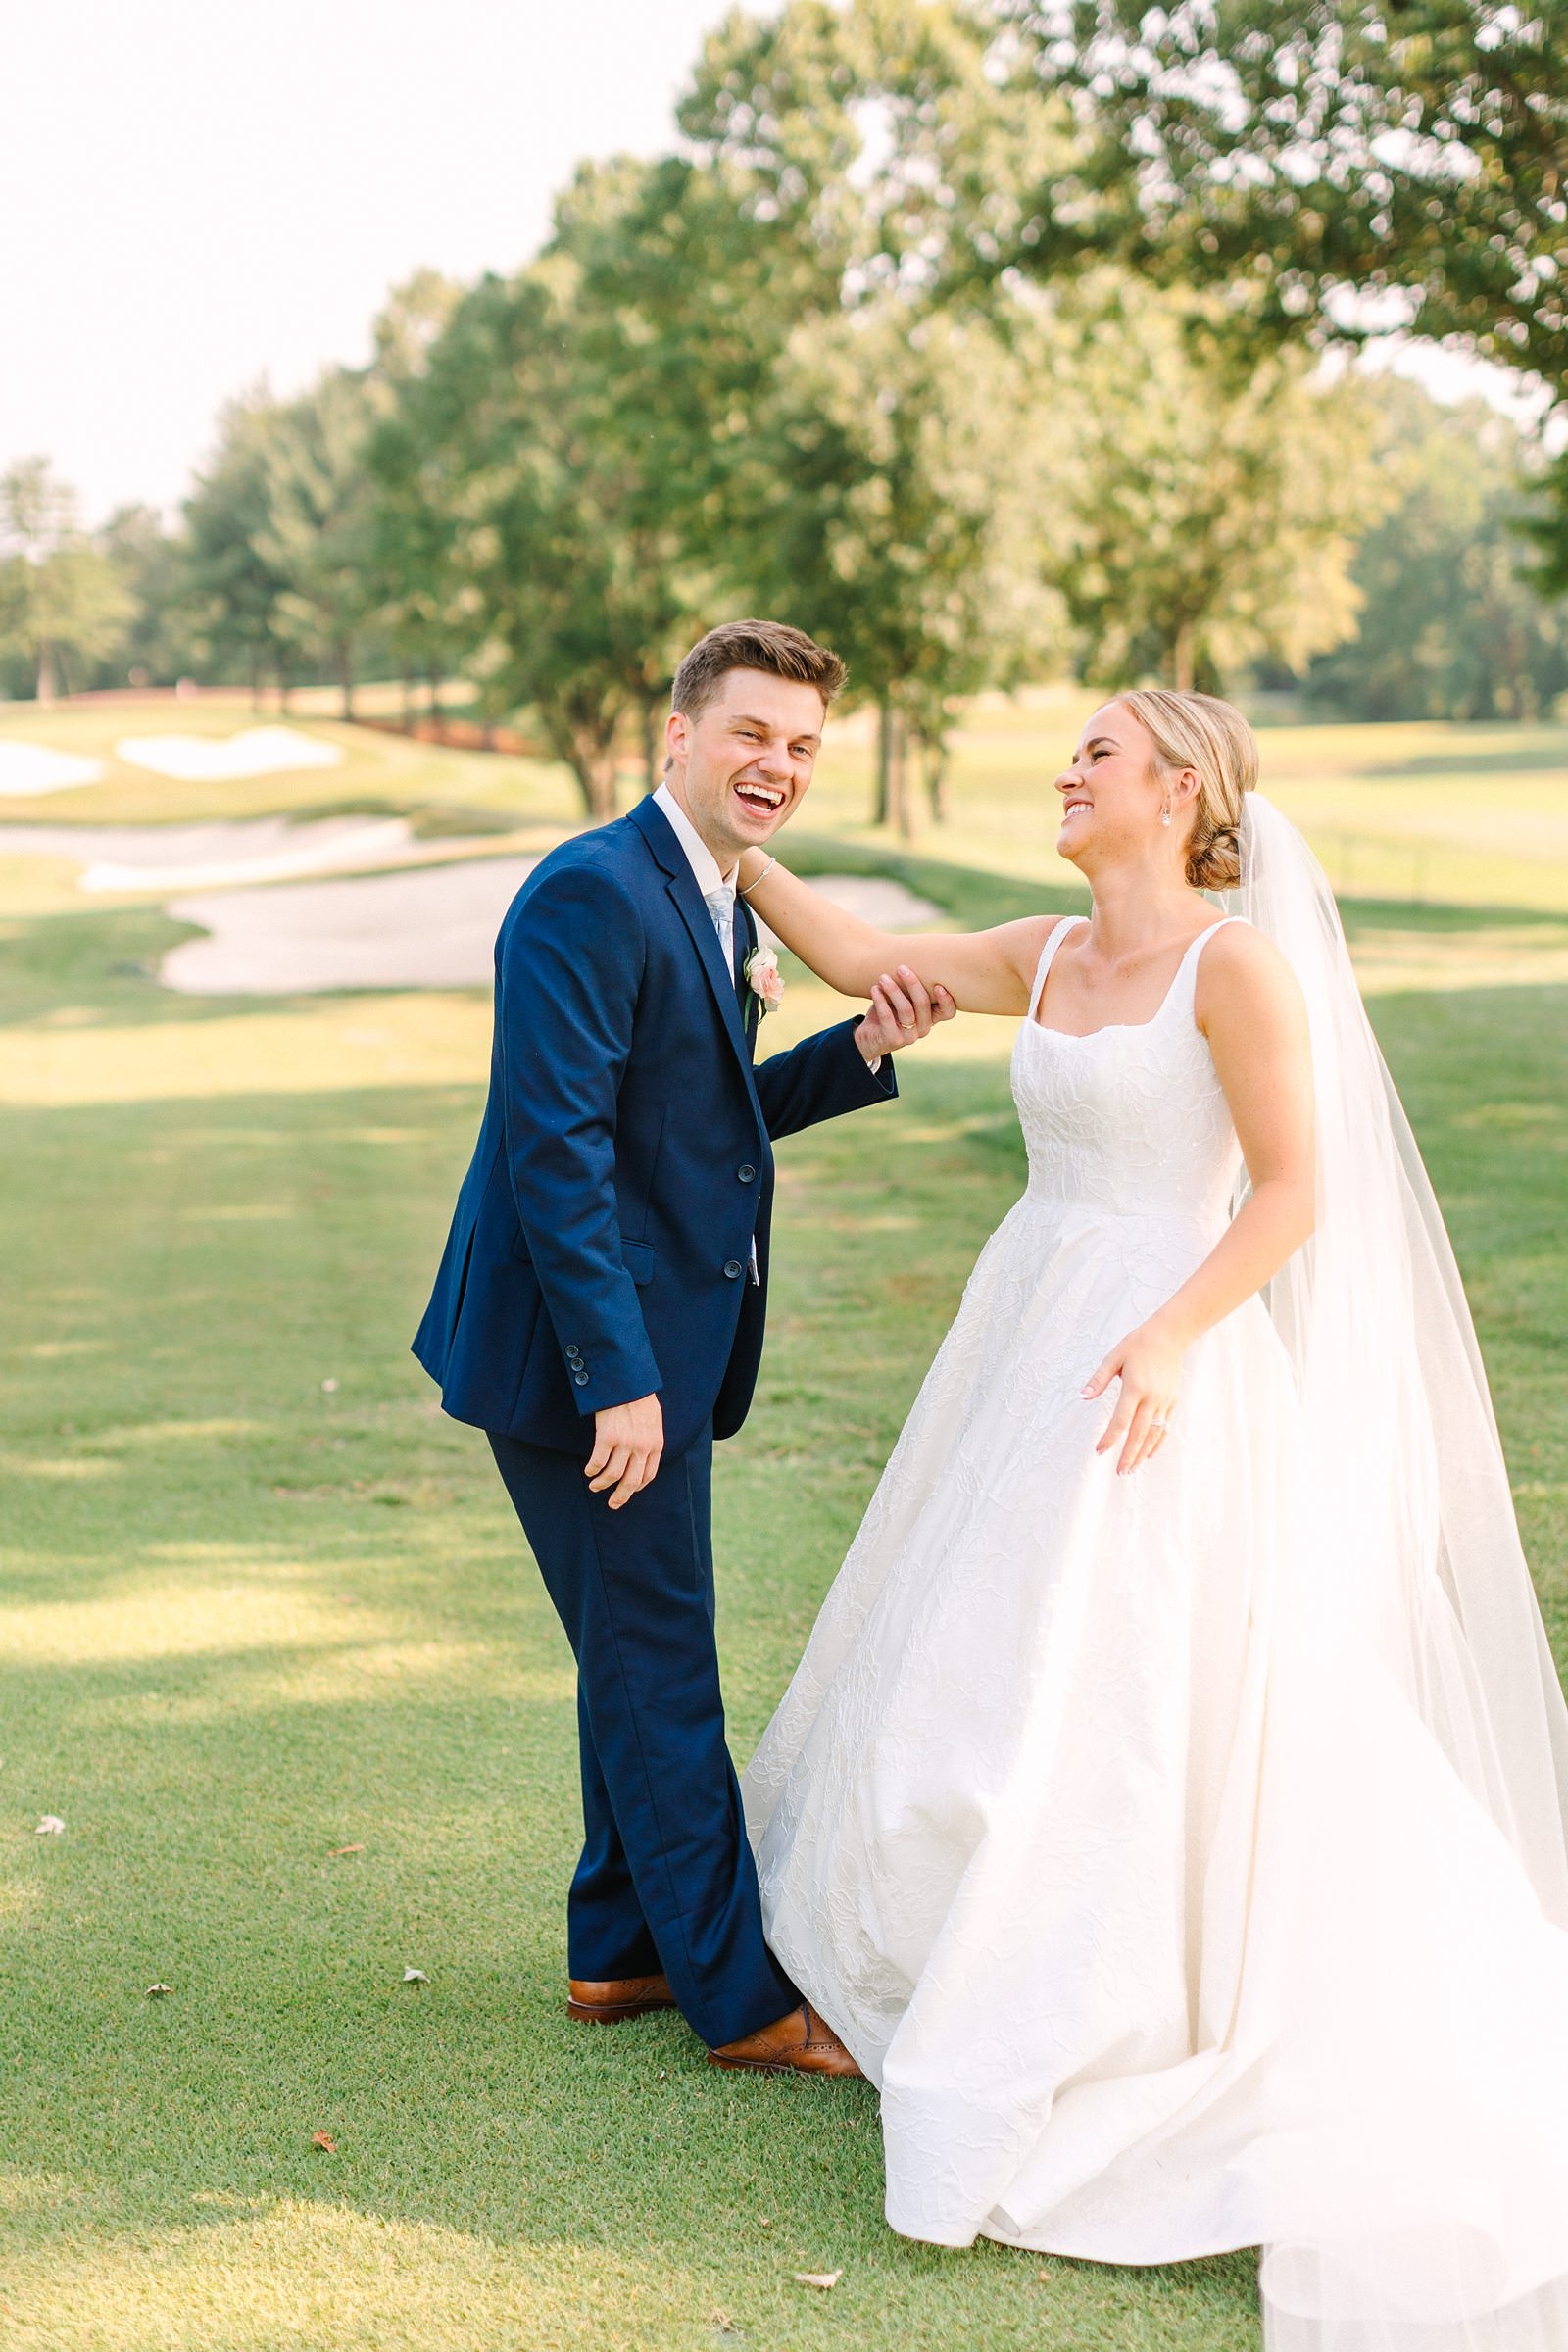 An Evansville Country Club Wedding | Ashley and Beau | Bret and Brandie Photography172.jpg